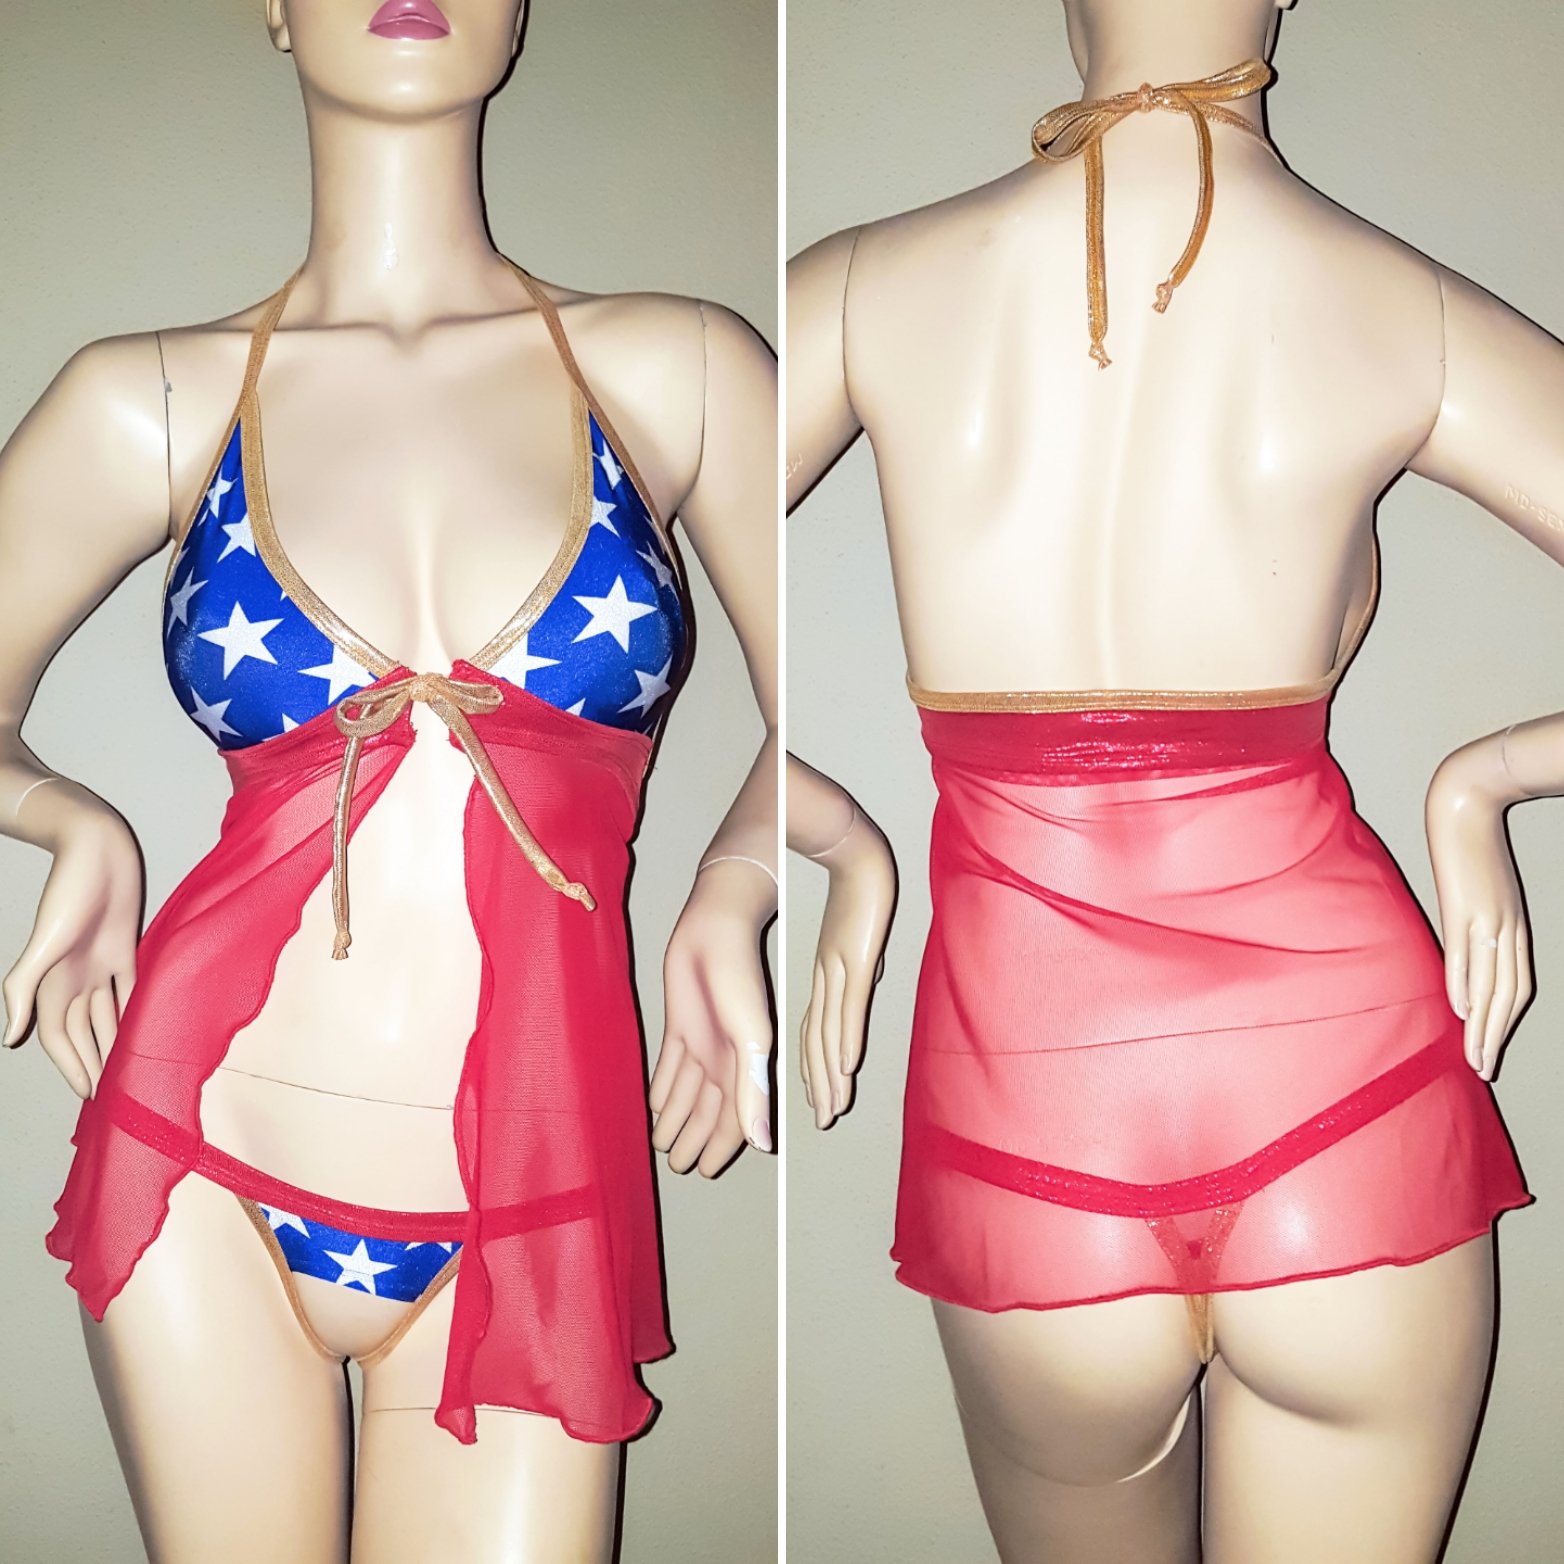 Teri's Passion on X: Super sexy Wonder Woman lingerie. Now available at:   🌟 #hot #comic #WonderWoman #lingerieaddict  #ComicCon #design #art #anime #cosplay #costume #pinup #style #OOTD  #fashion #shop #onlineshopping